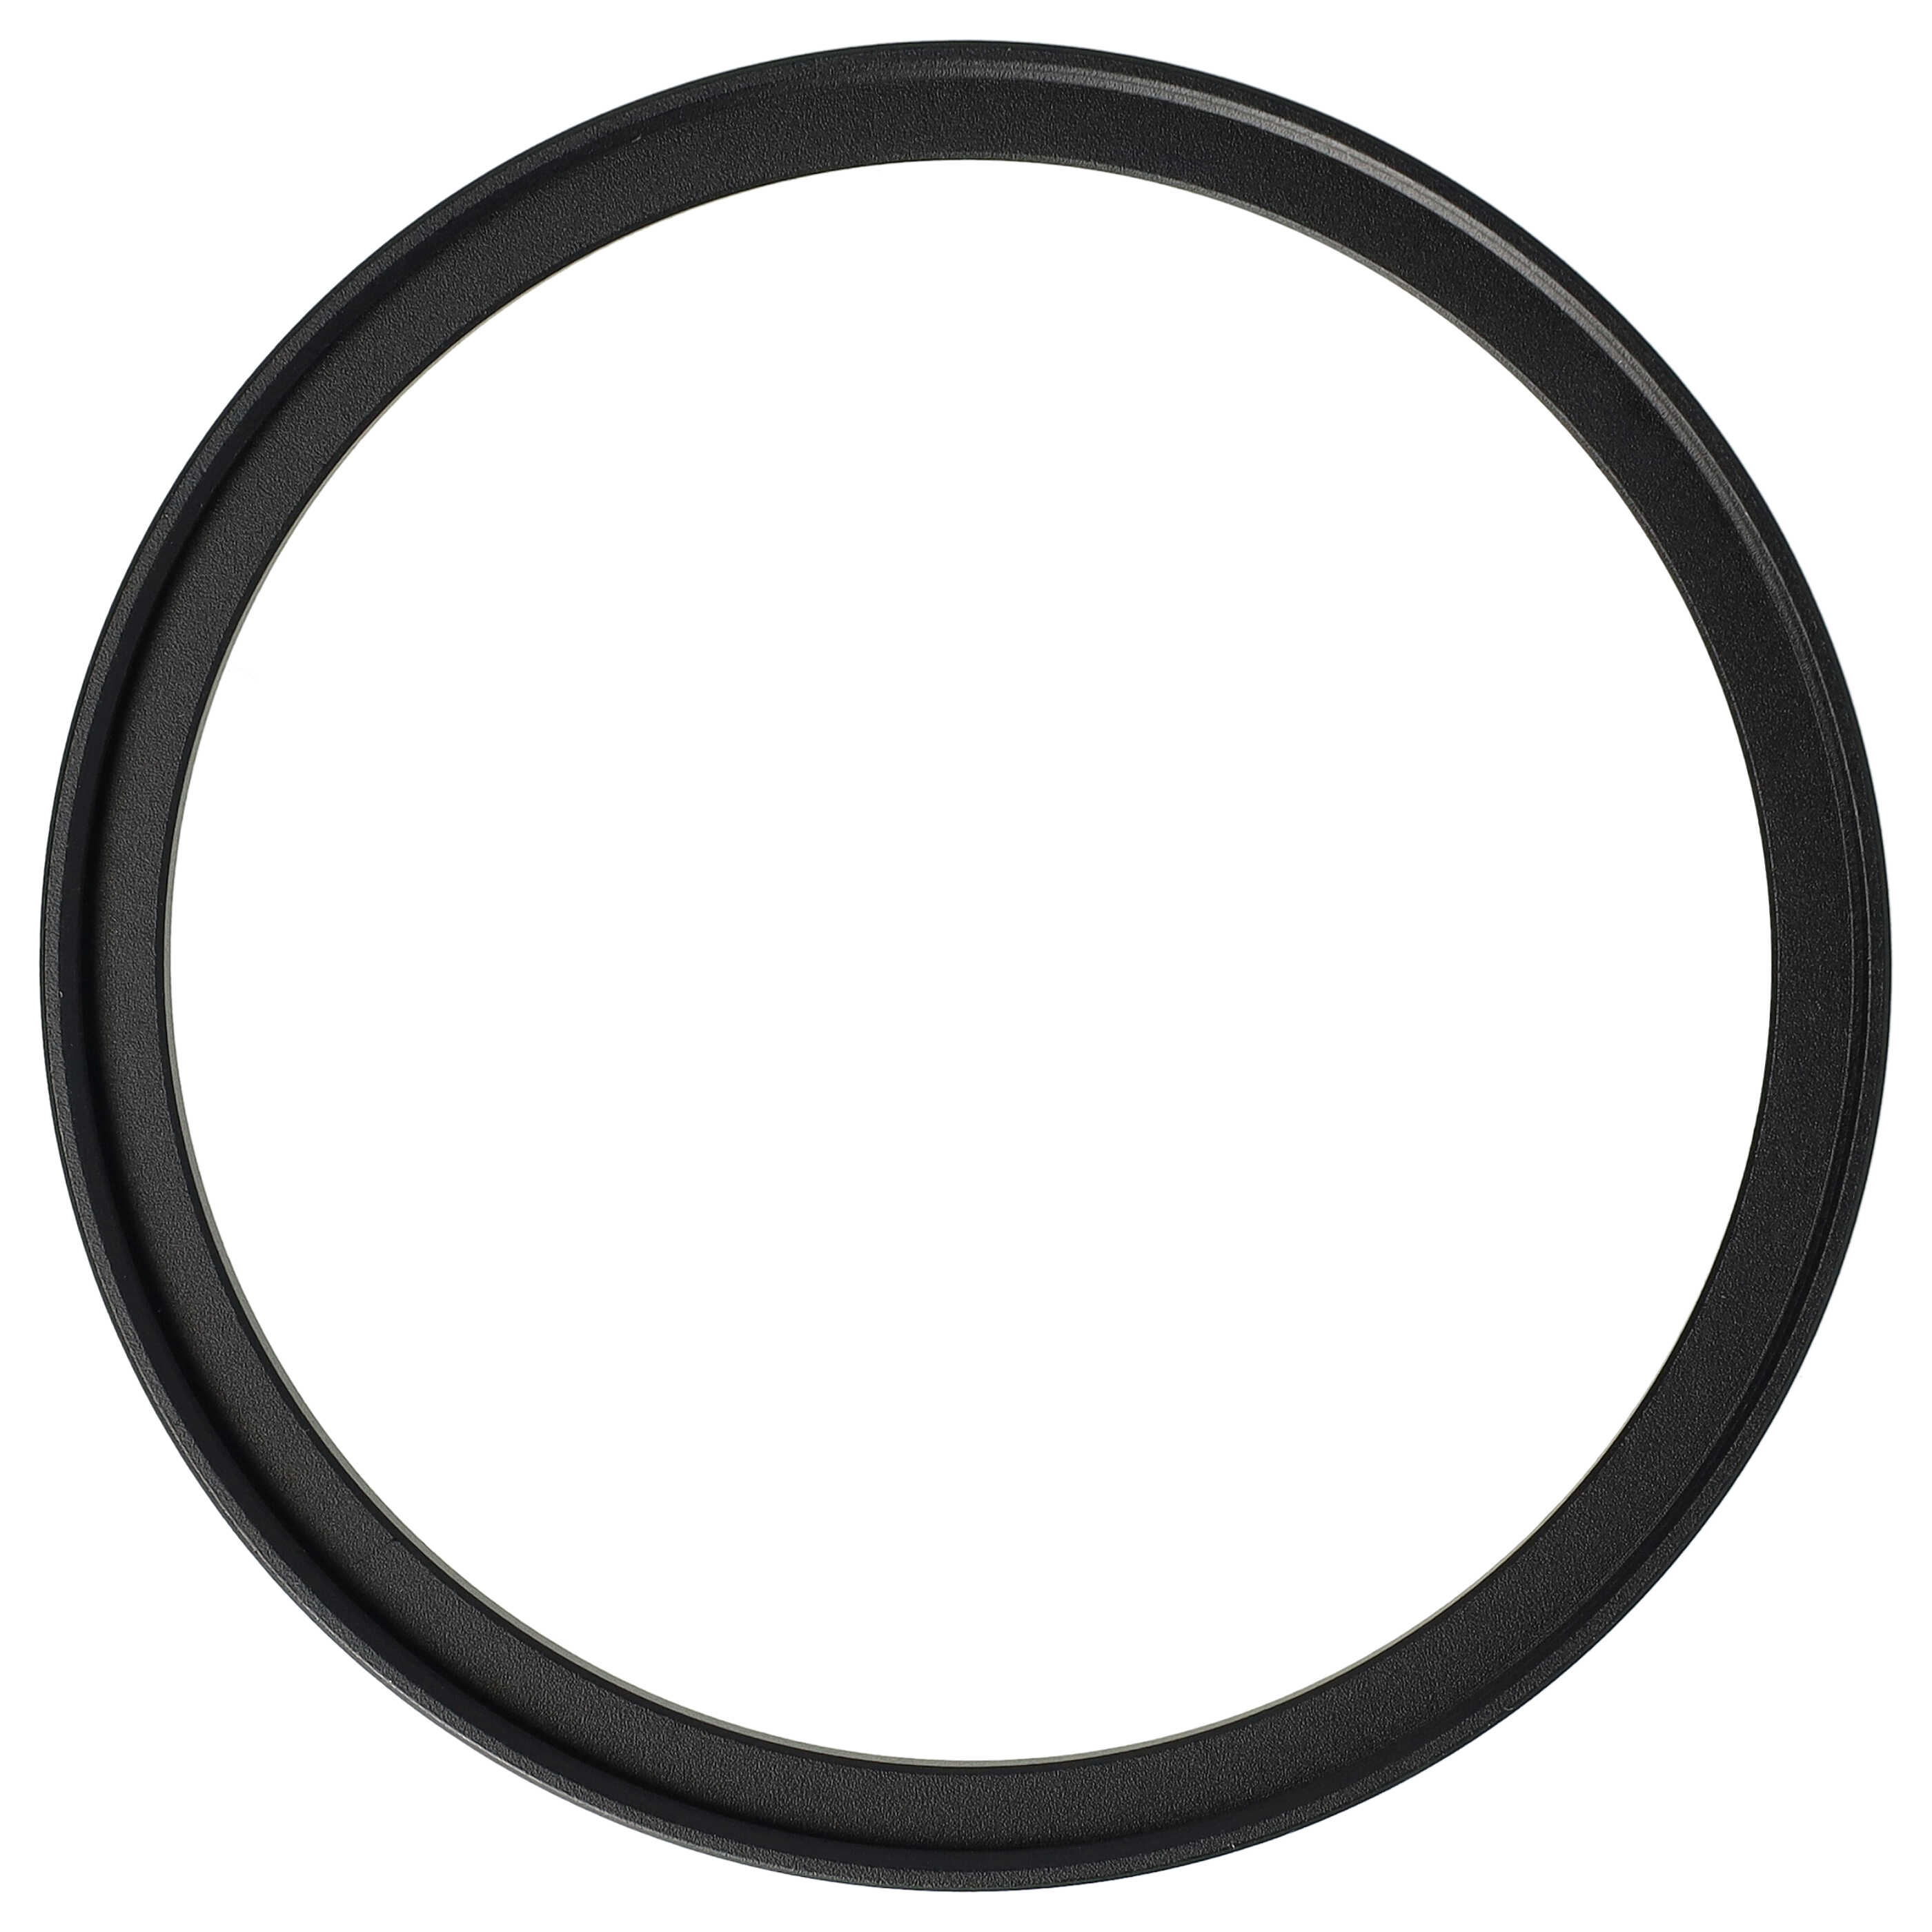 Step-Up Ring Adapter of 72 mm to 77 mmfor various Camera Lens - Filter Adapter